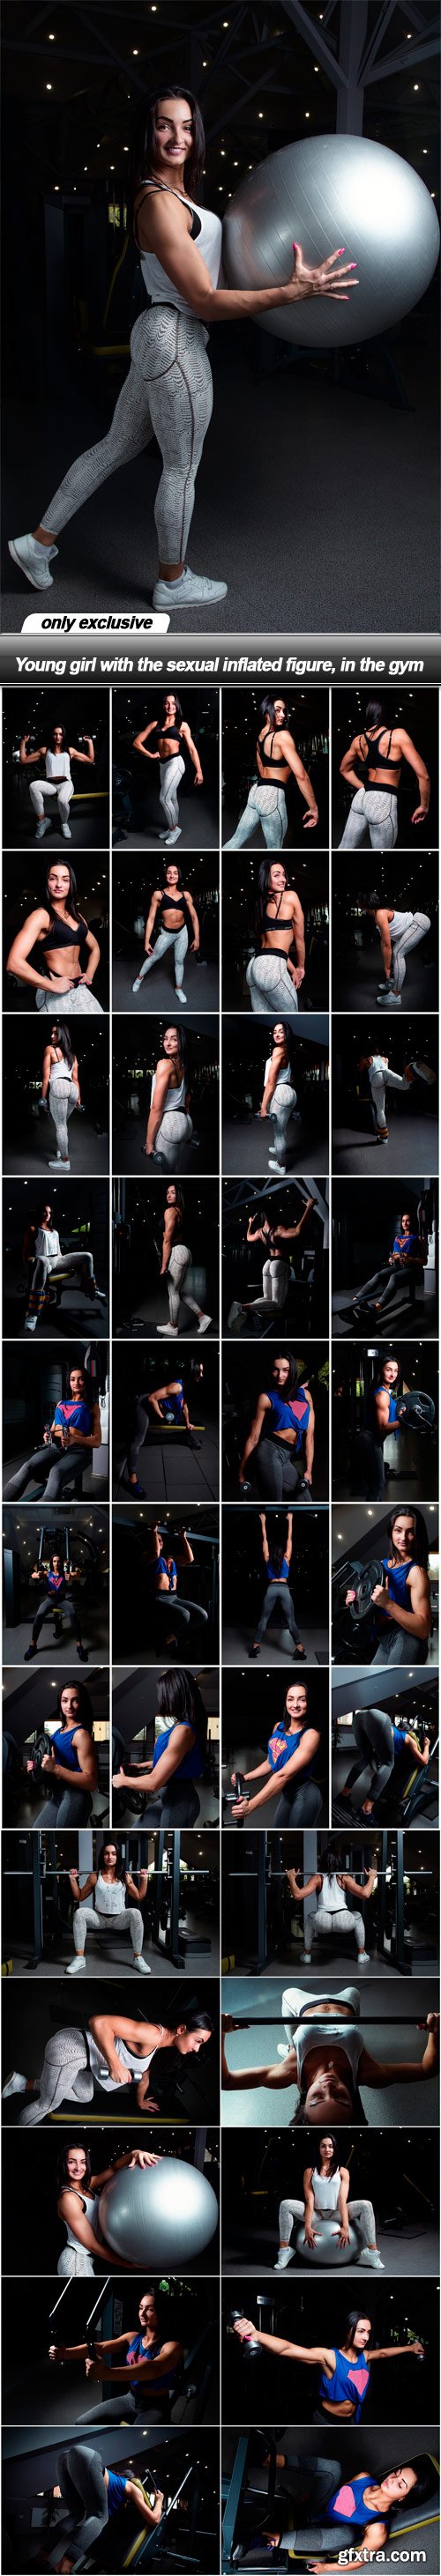 Young girl with the sexual inflated figure, in the gym - 39 UHQ JPEG